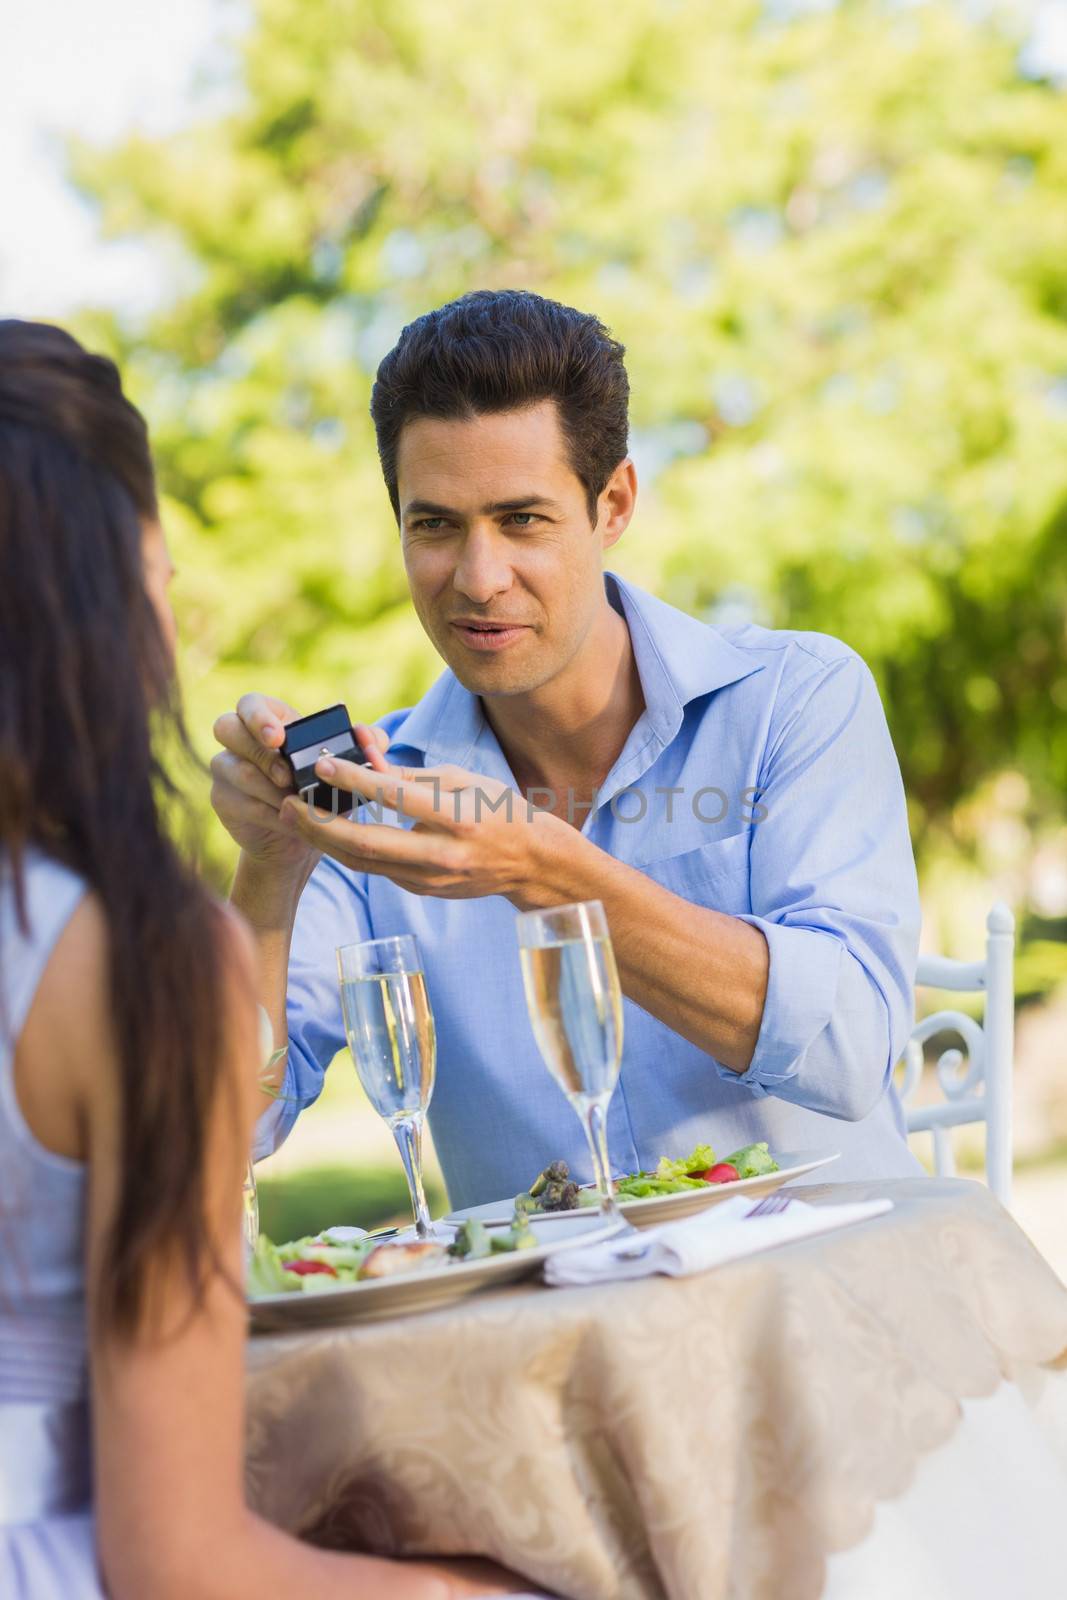 Man proposing a woman at an outdoor caf├® by Wavebreakmedia